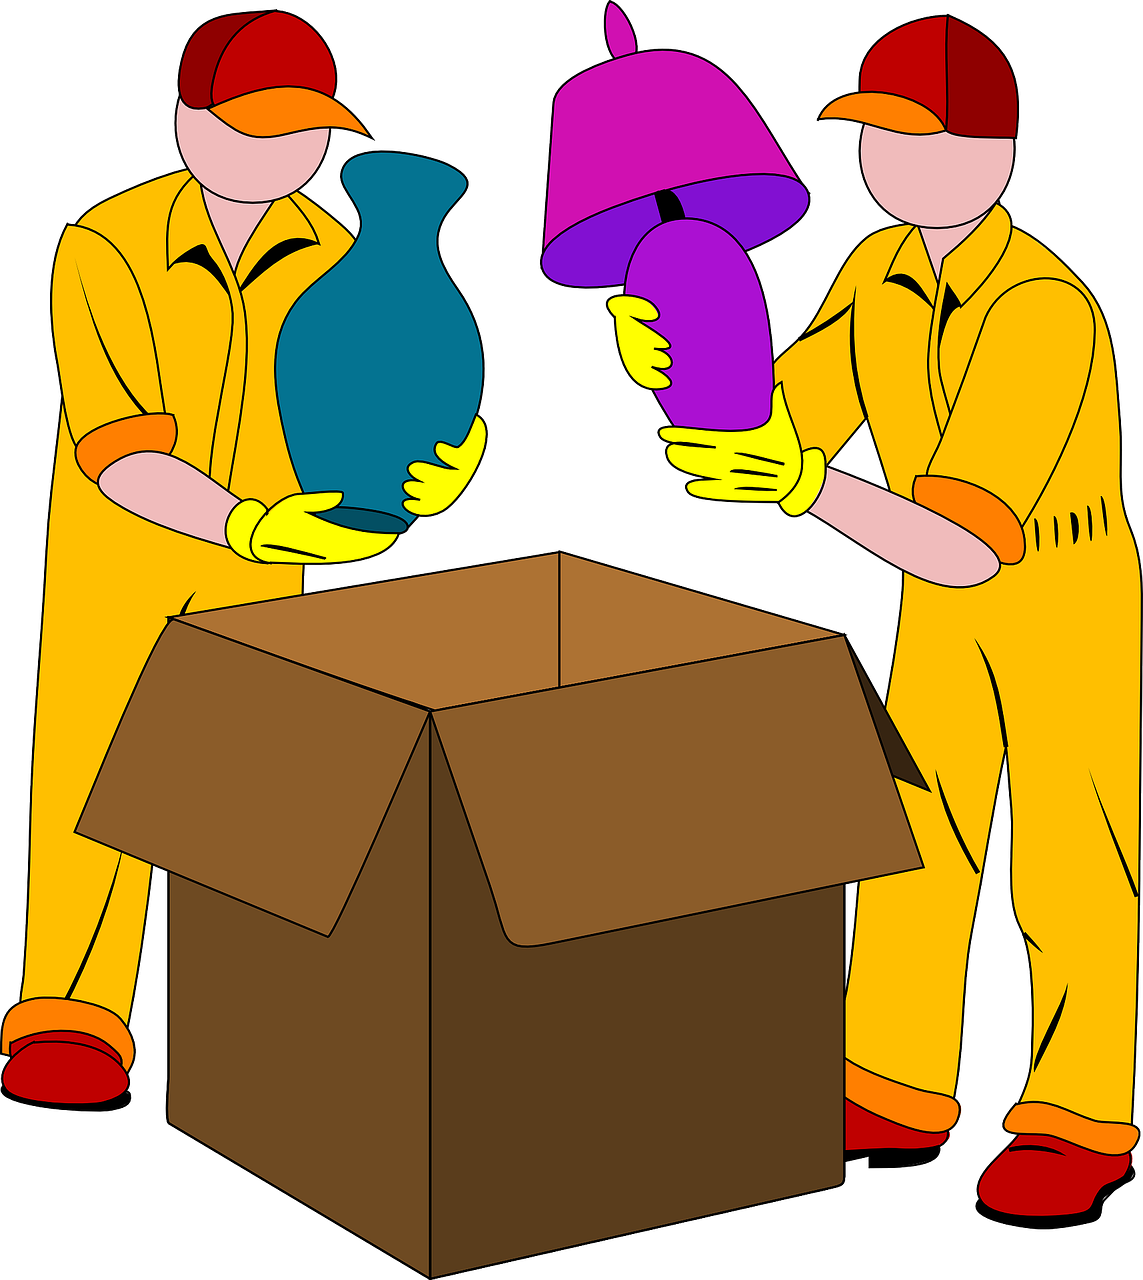 movers, packing, box-24403.jpg